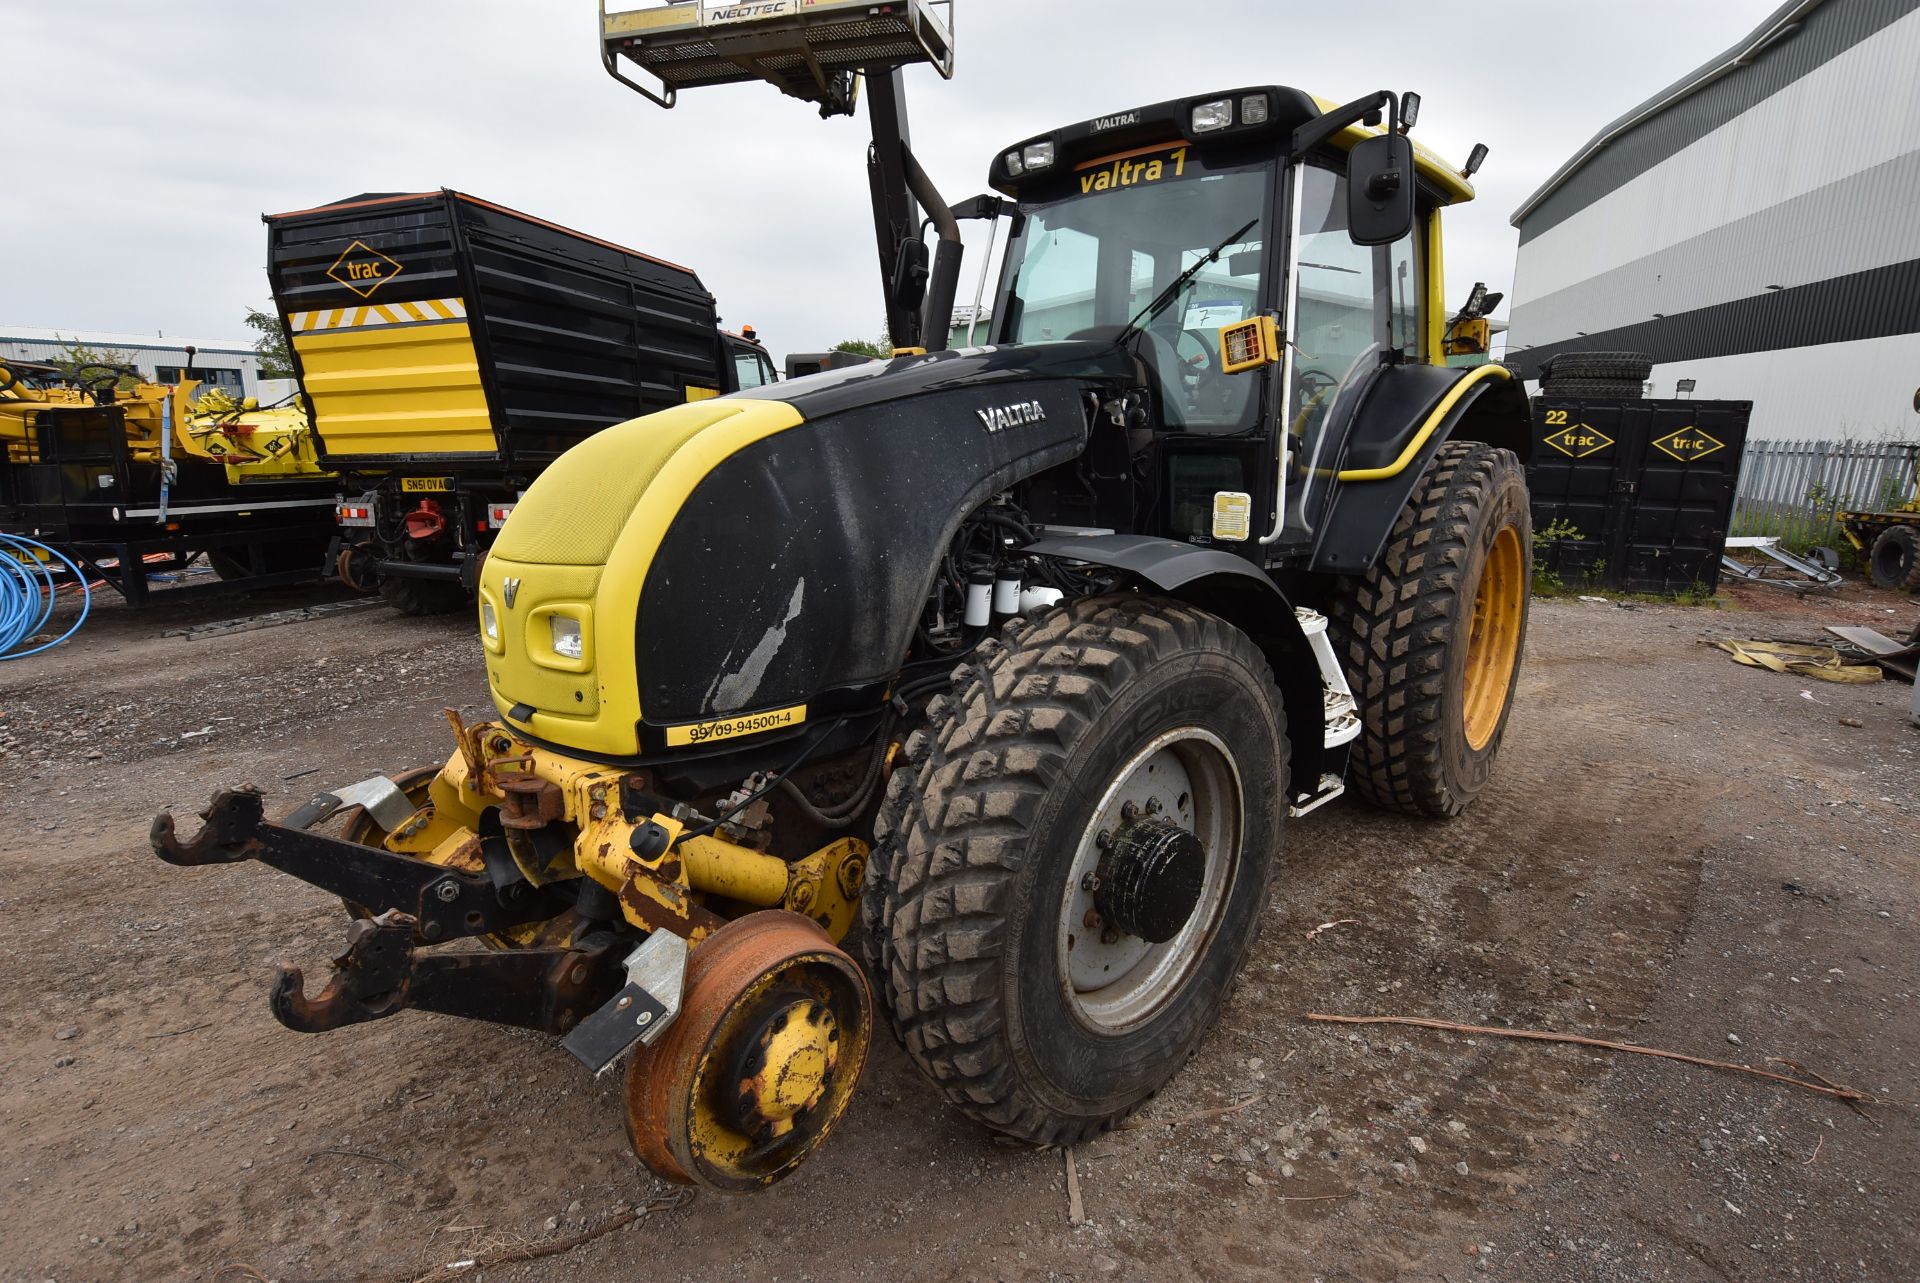 Valtra T121h AC10 2 ROAD RAIL AGRICULTURAL TRACTOR